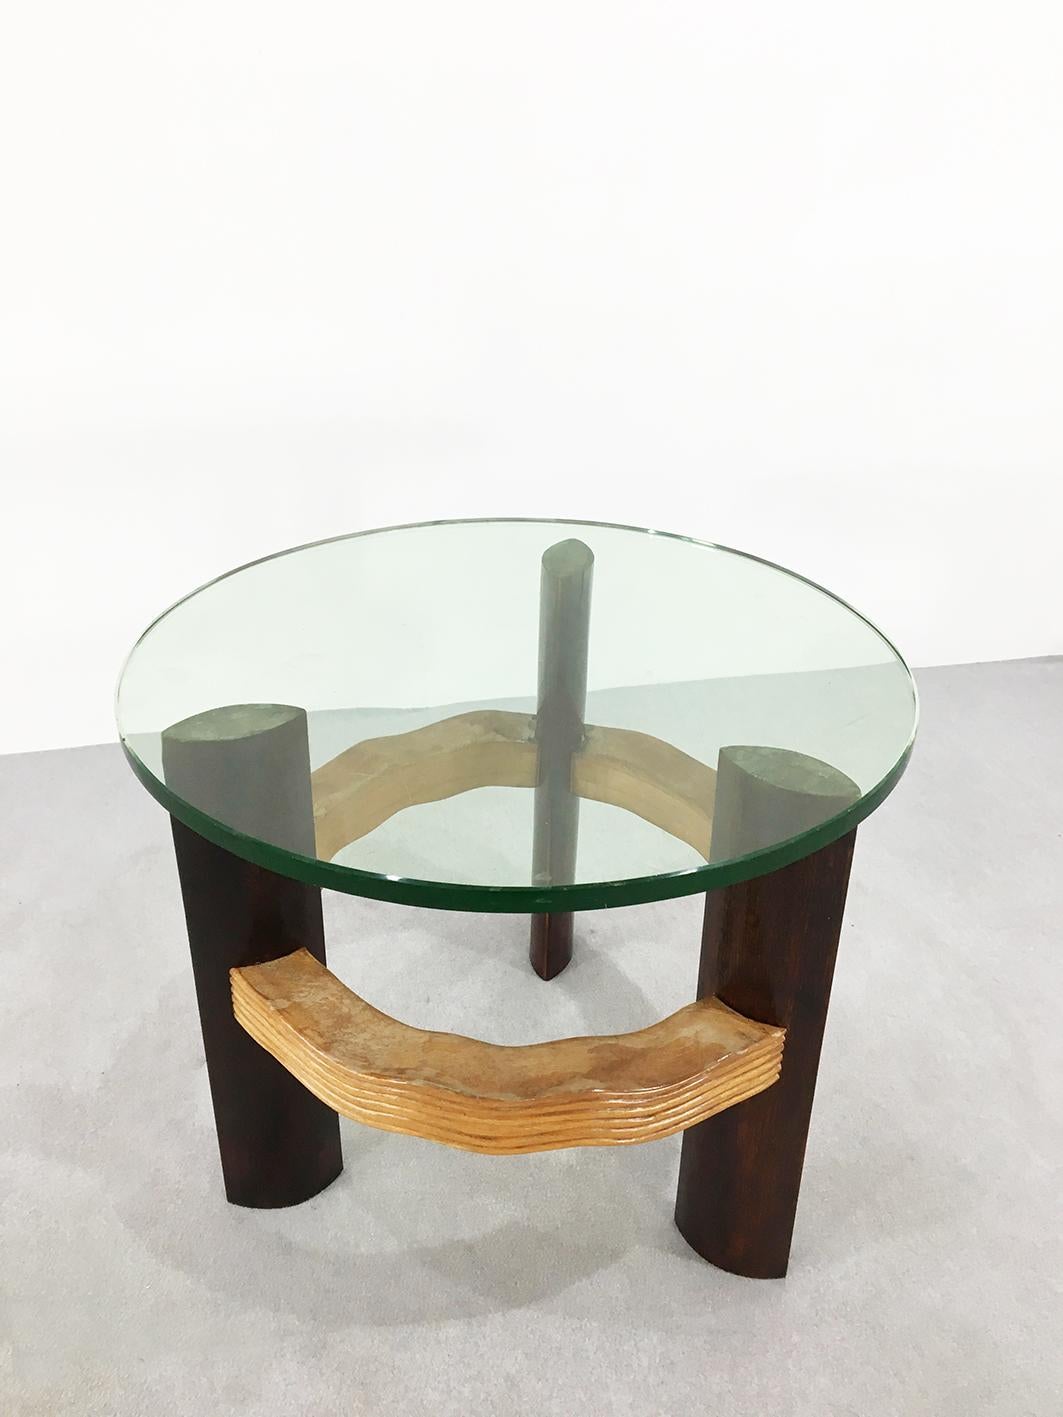 The table is made by the famous designer Osvaldo Borsani. Its top is made of 1 cm thick crystal glass. The feet that support its structure are made of ebony wood. We note that at the centre of each foot there is a circular circle made of cherrywood.